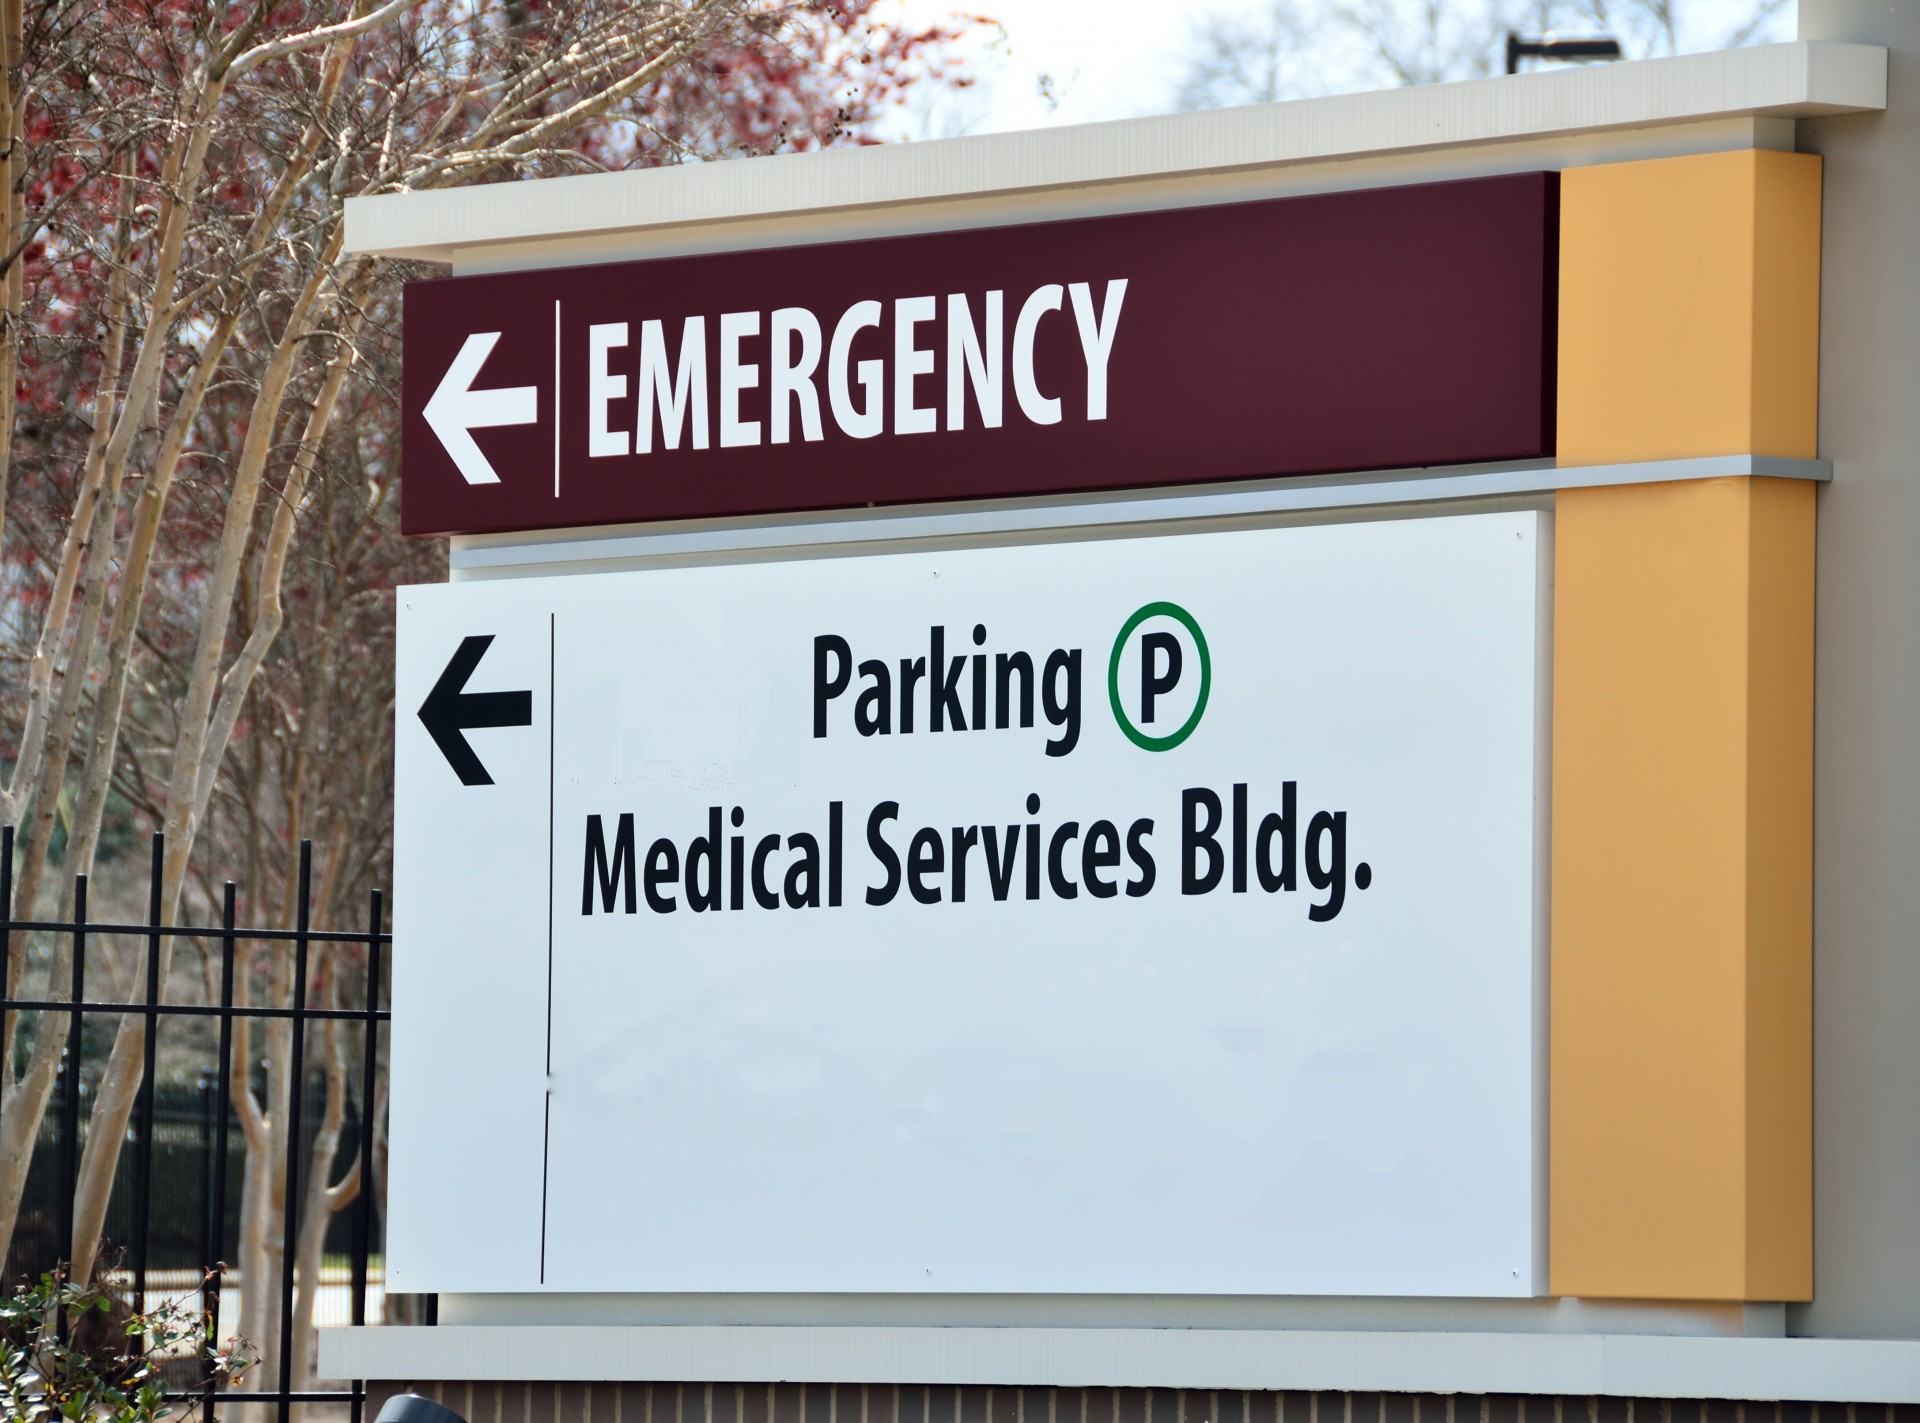 Hospital sign pointing to emergency room and parking. 